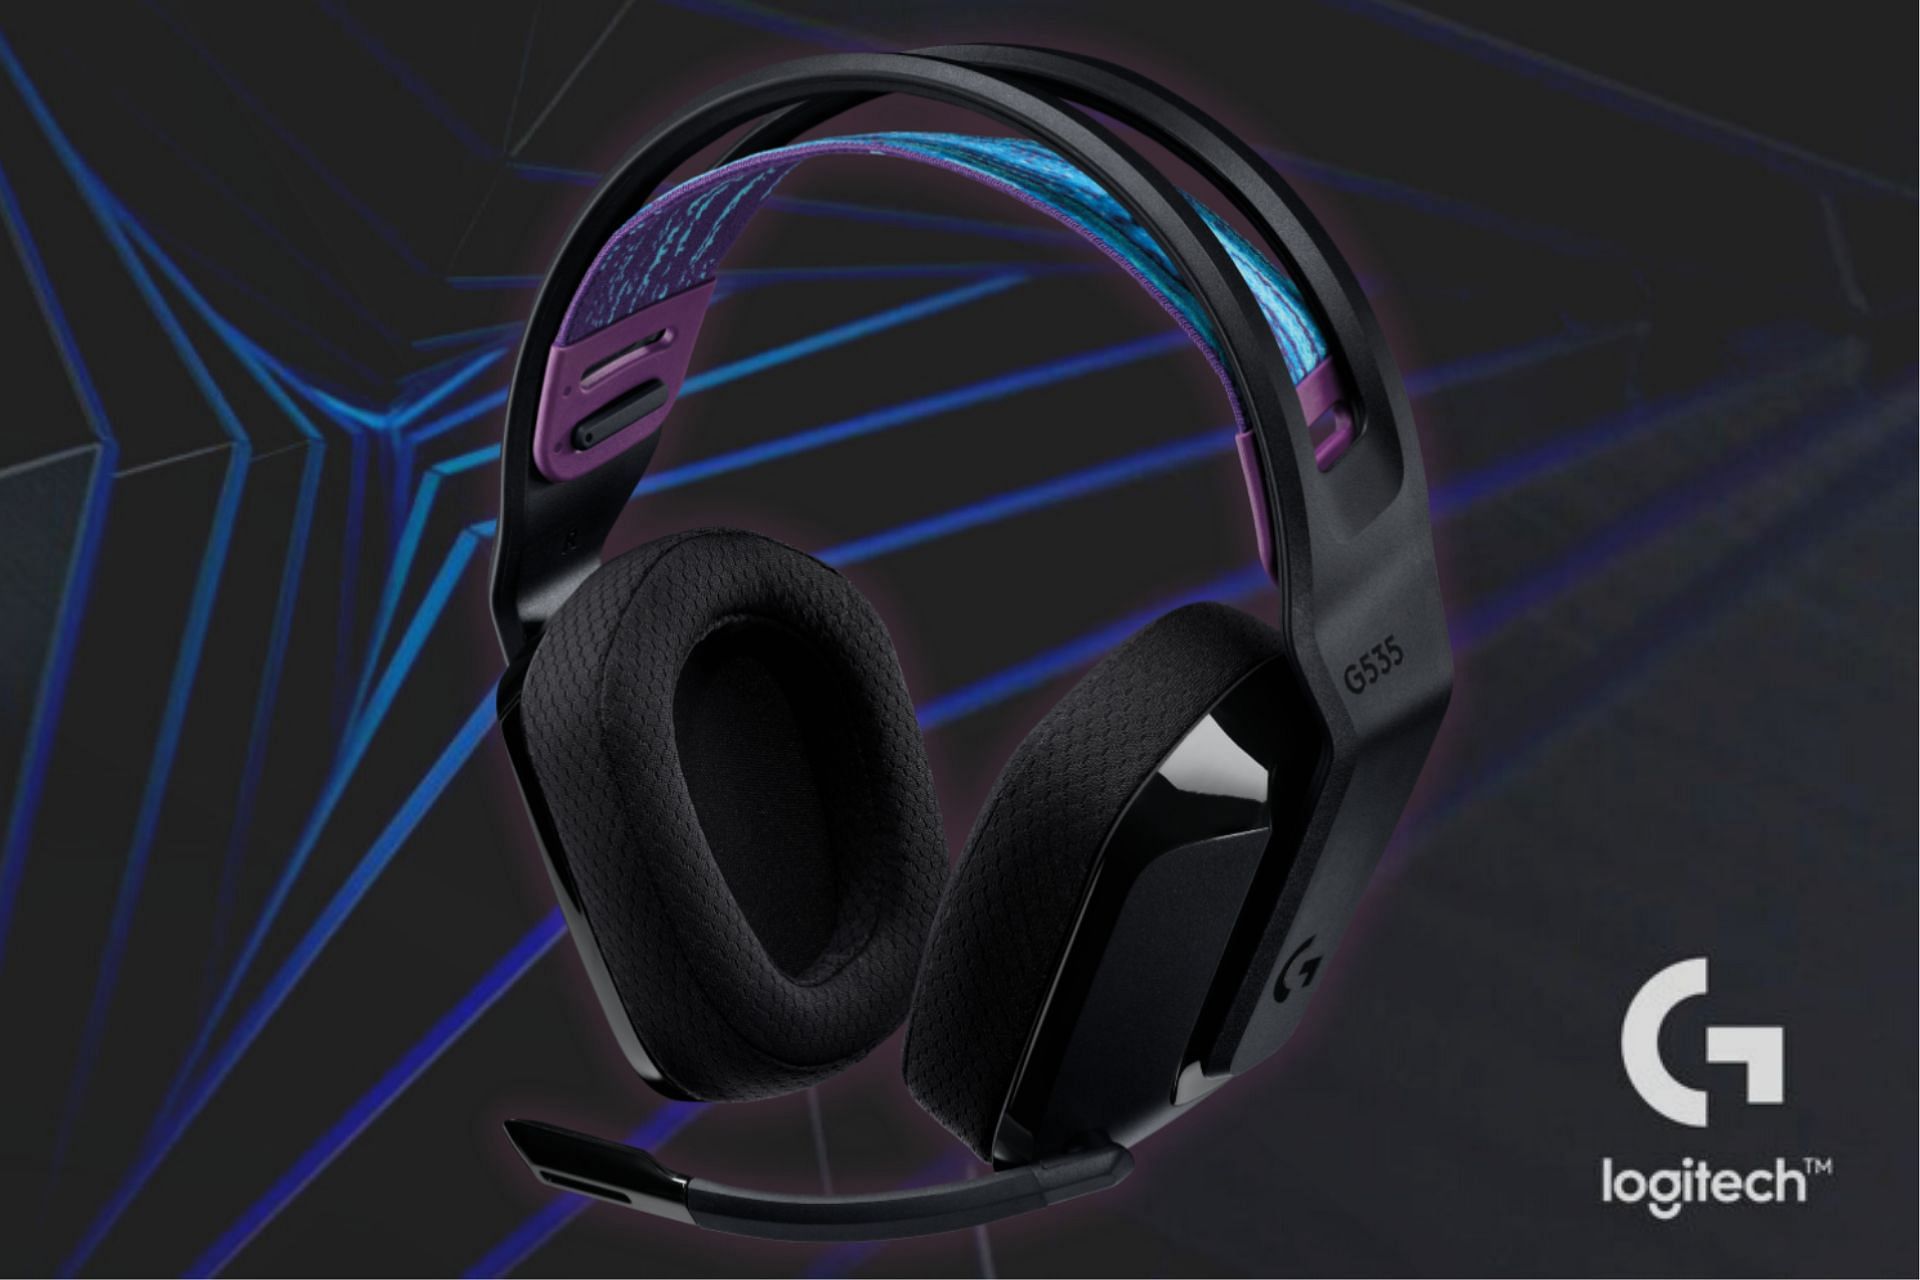 5 best gaming headset to buy under $100 in 2022